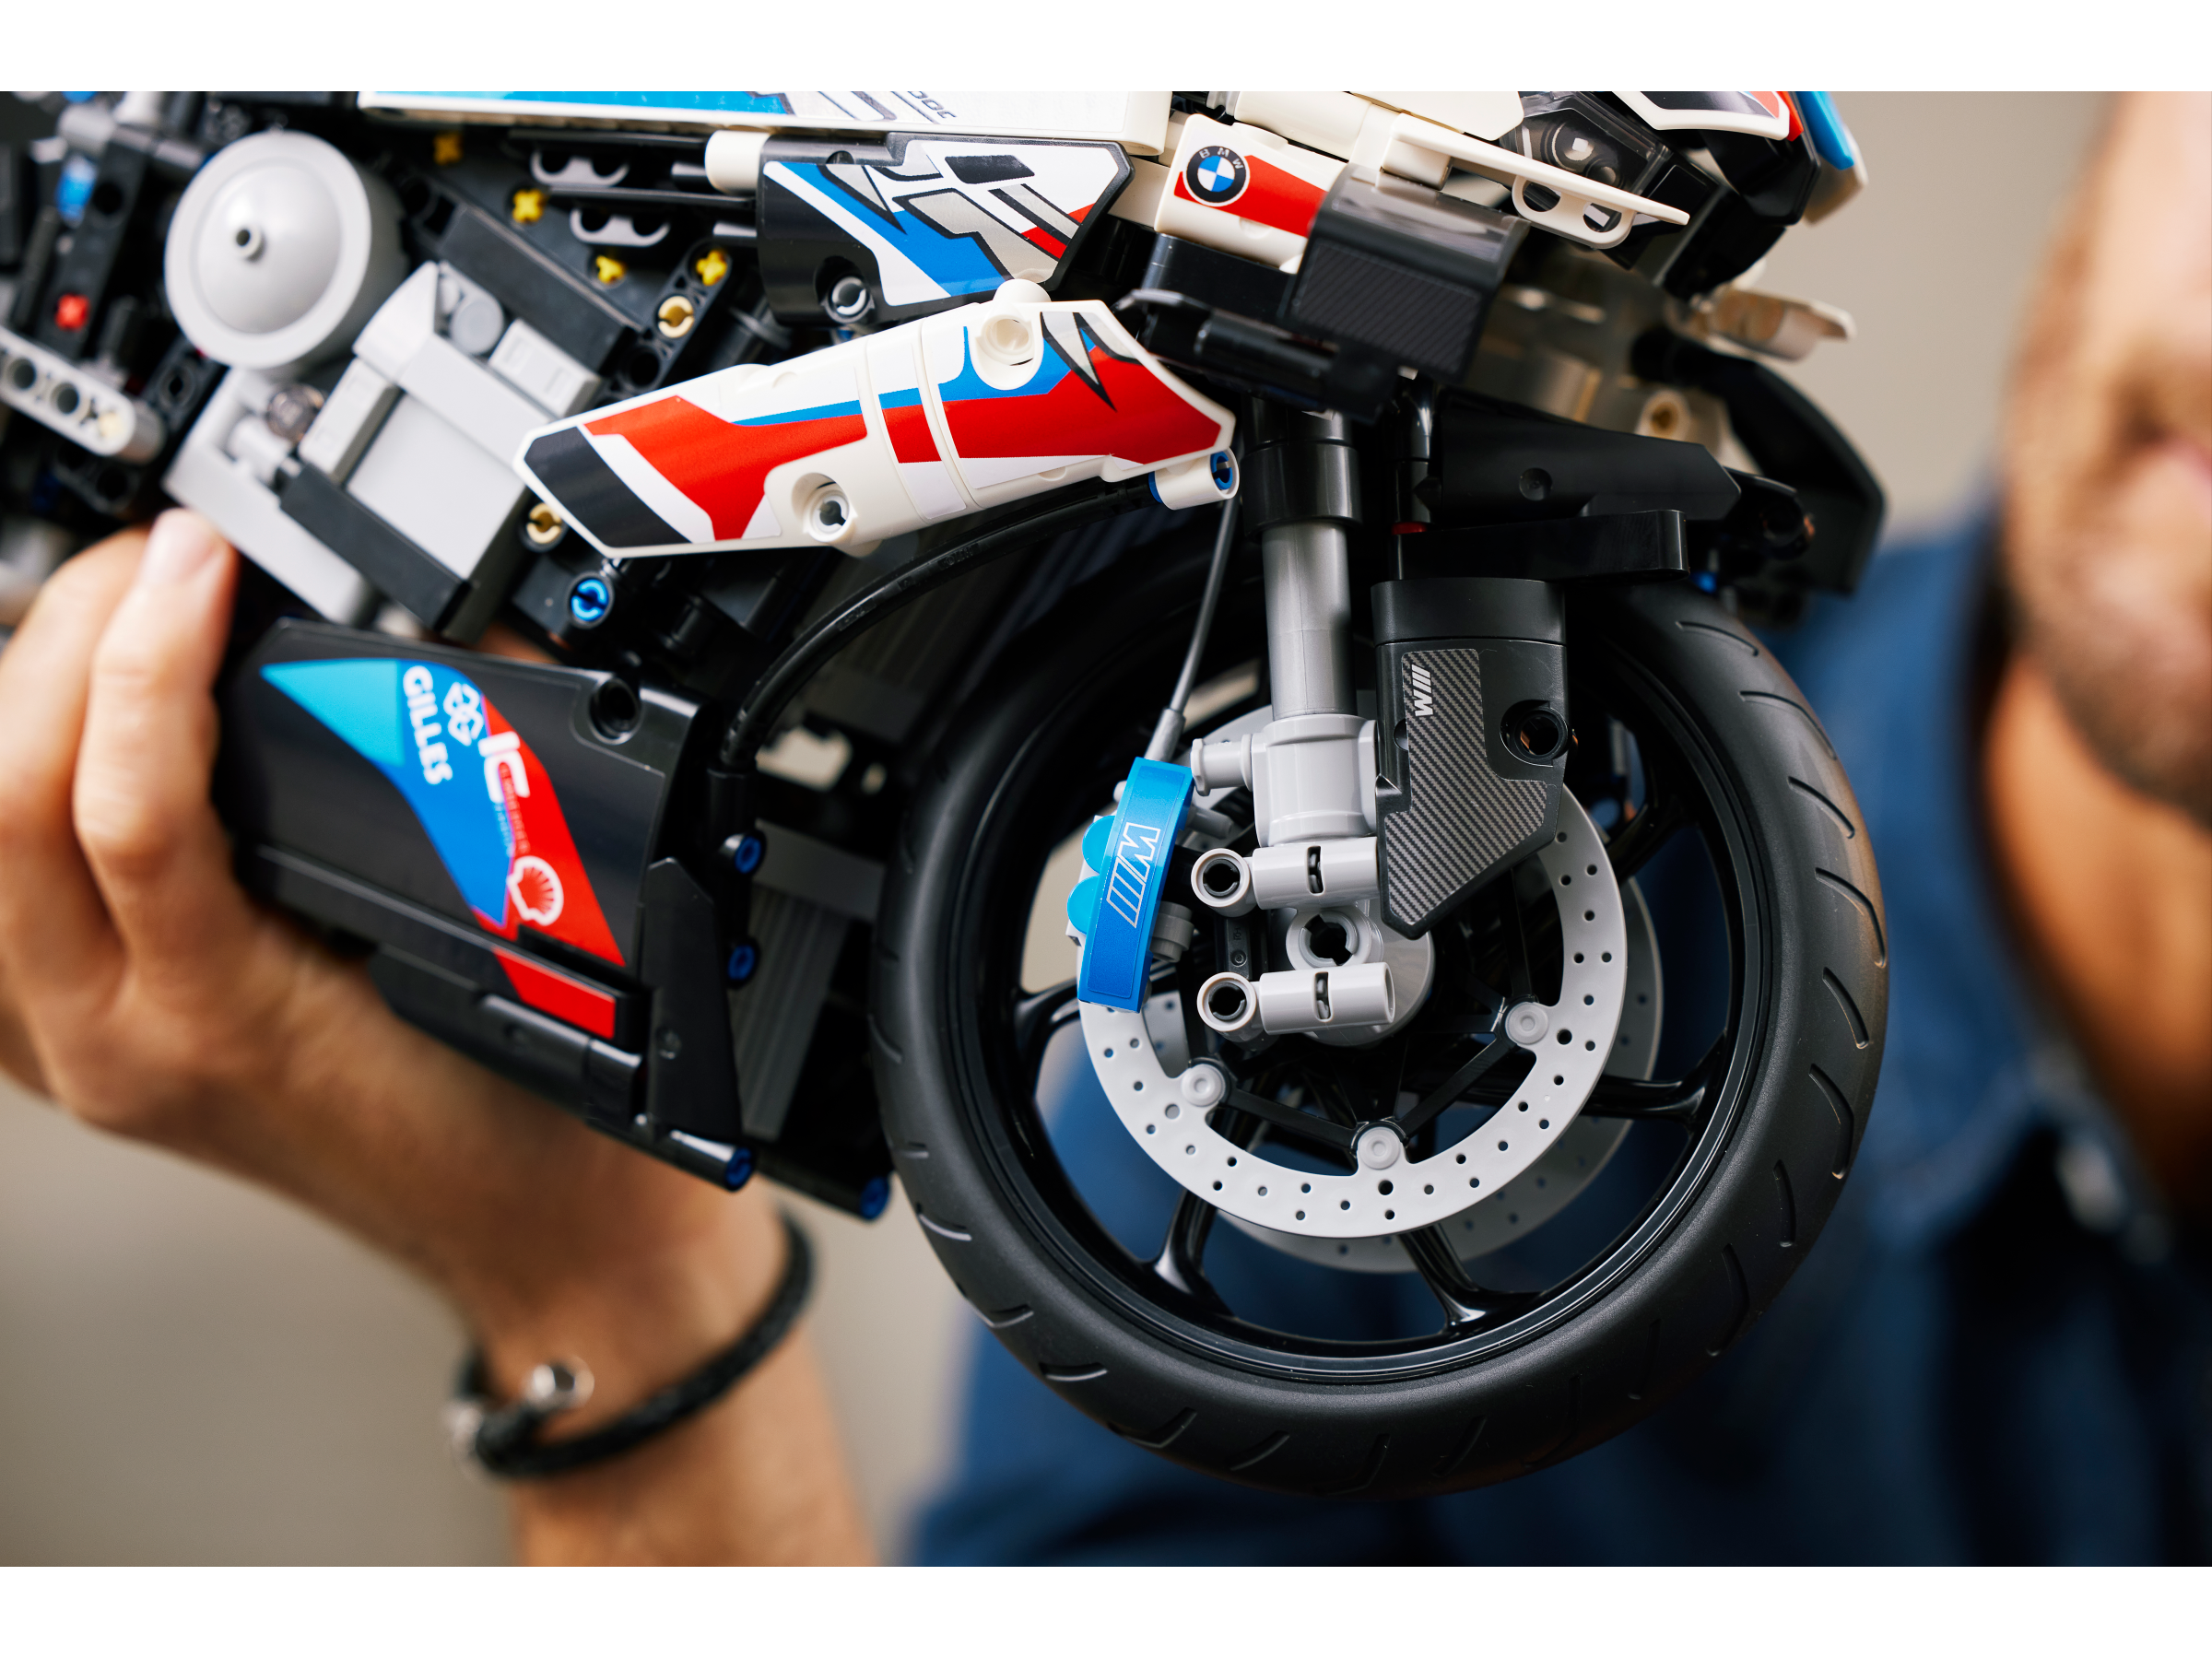 Lego Technic's New $300 BMW M 1000 RR Features A Working Three-Speed  Gearbox